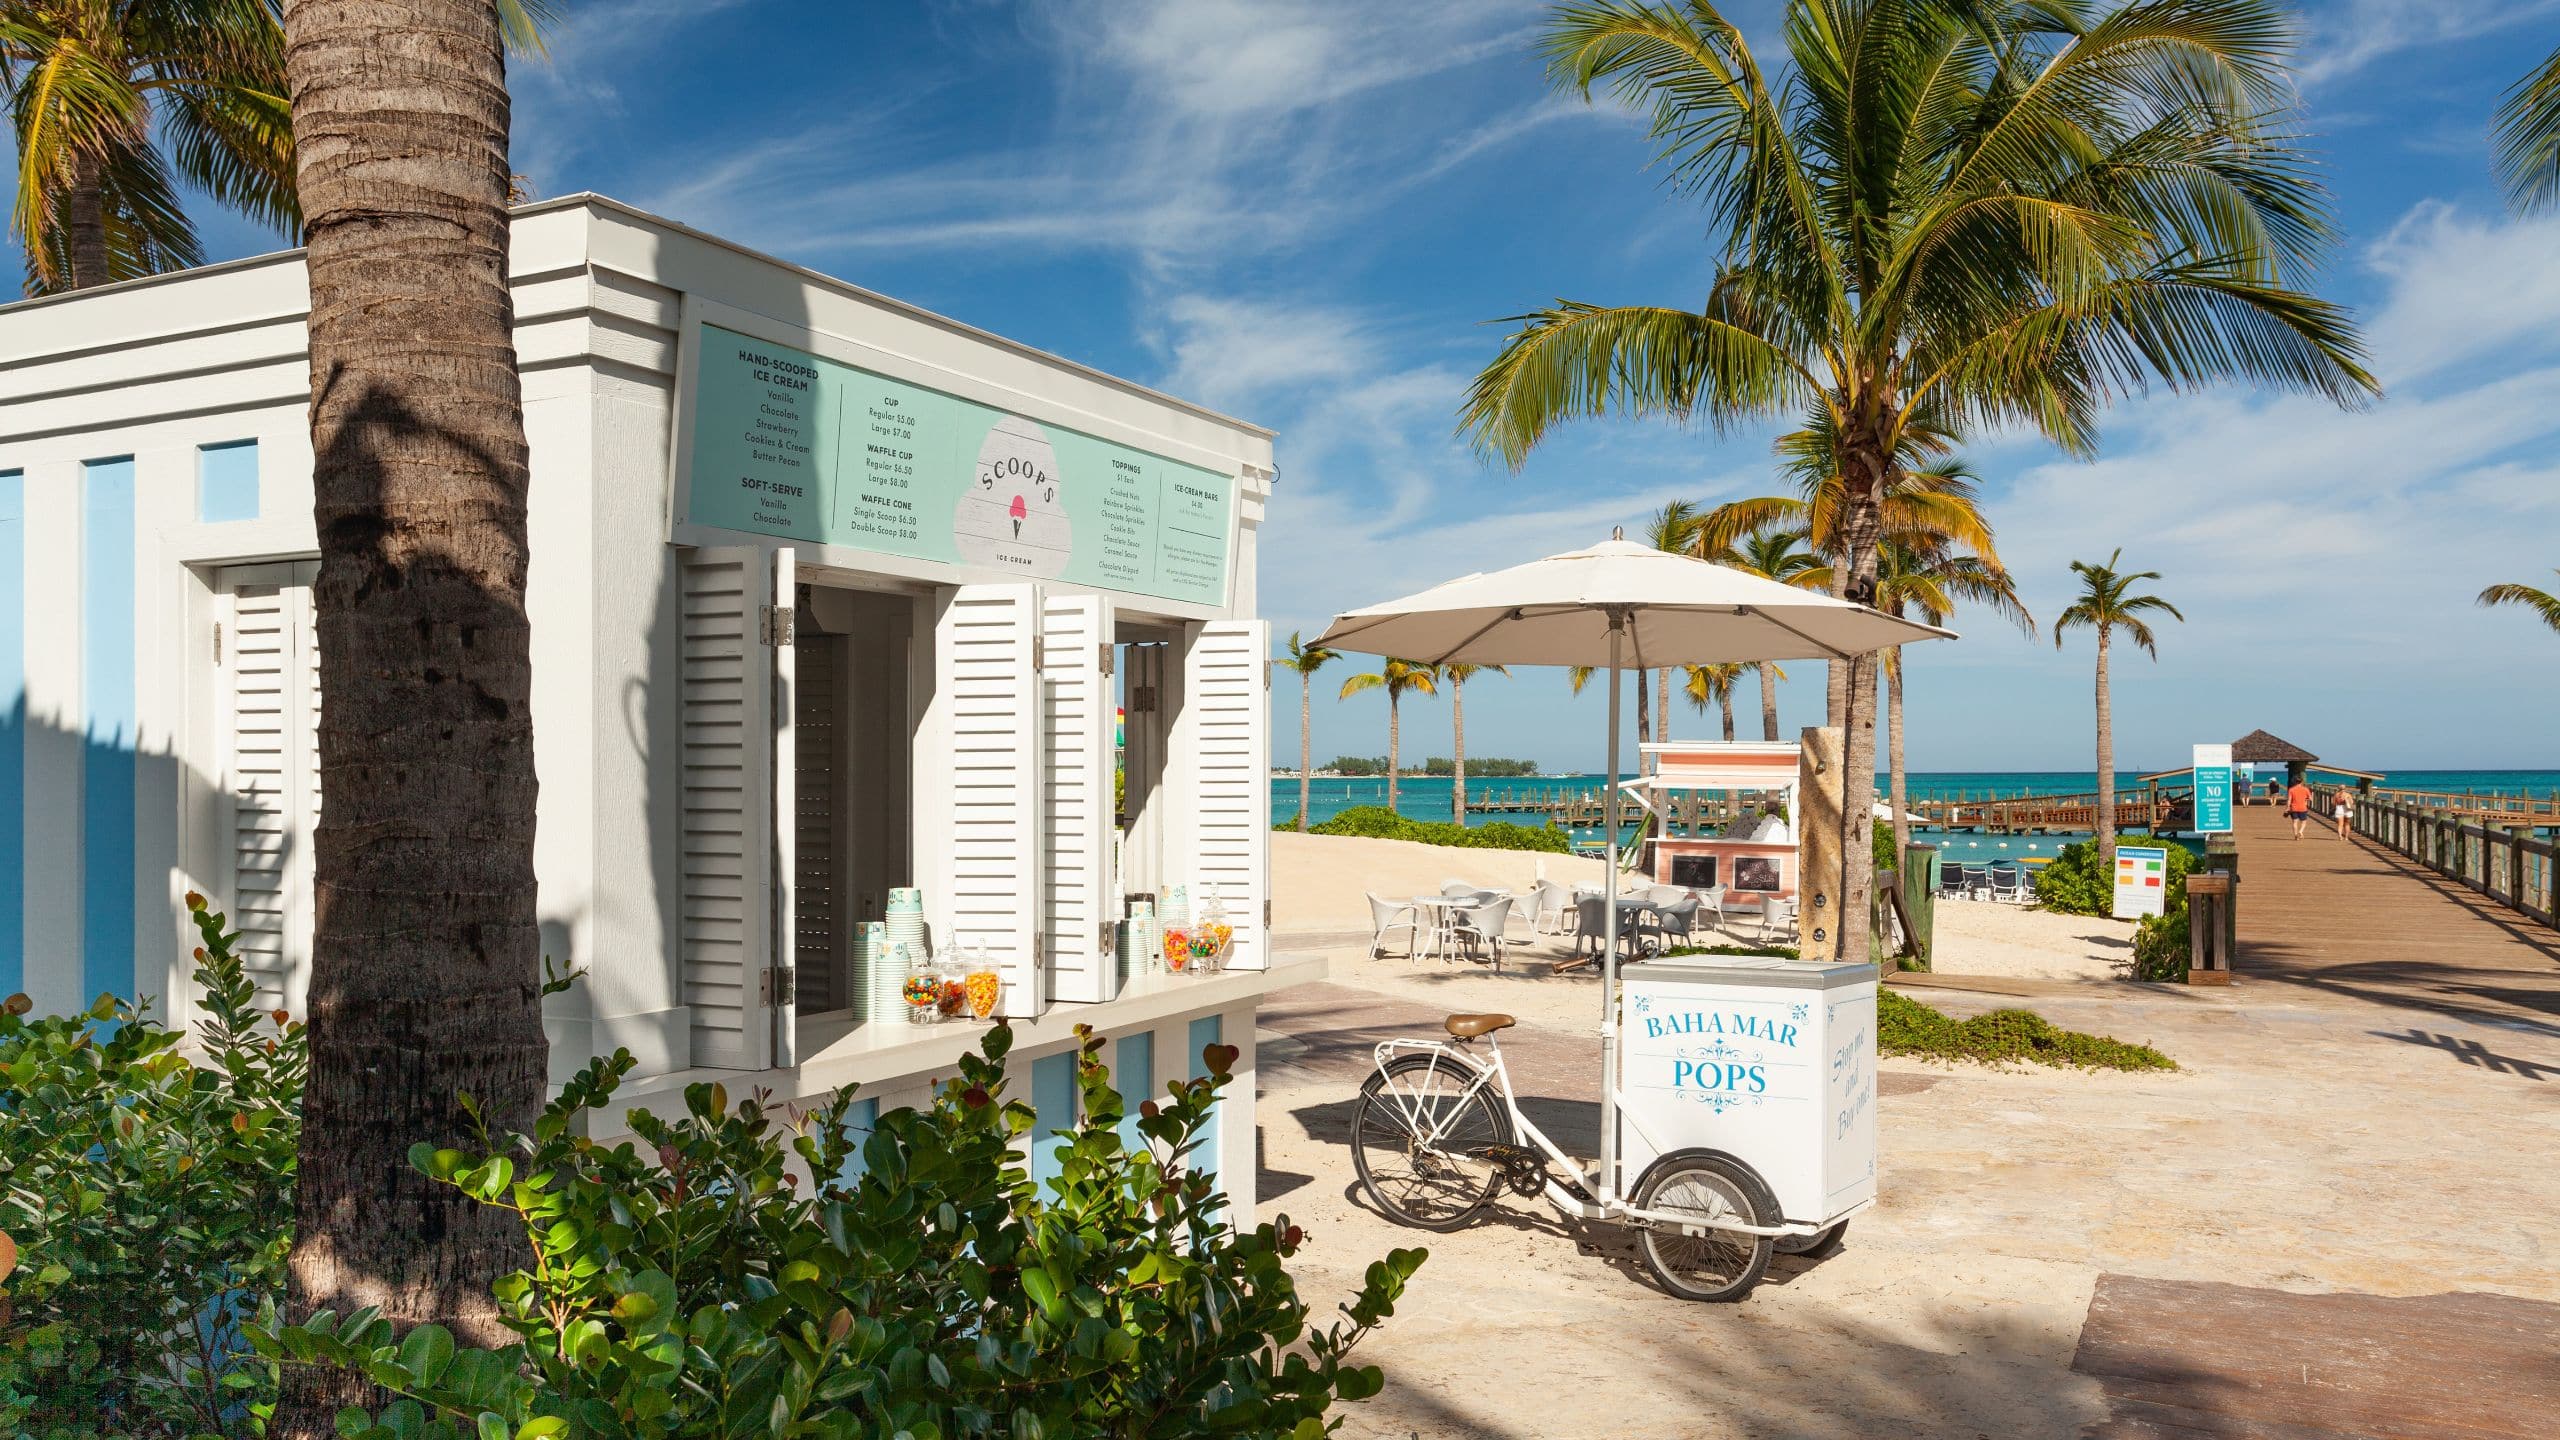 Ice cream stand and cart in Baha Mar